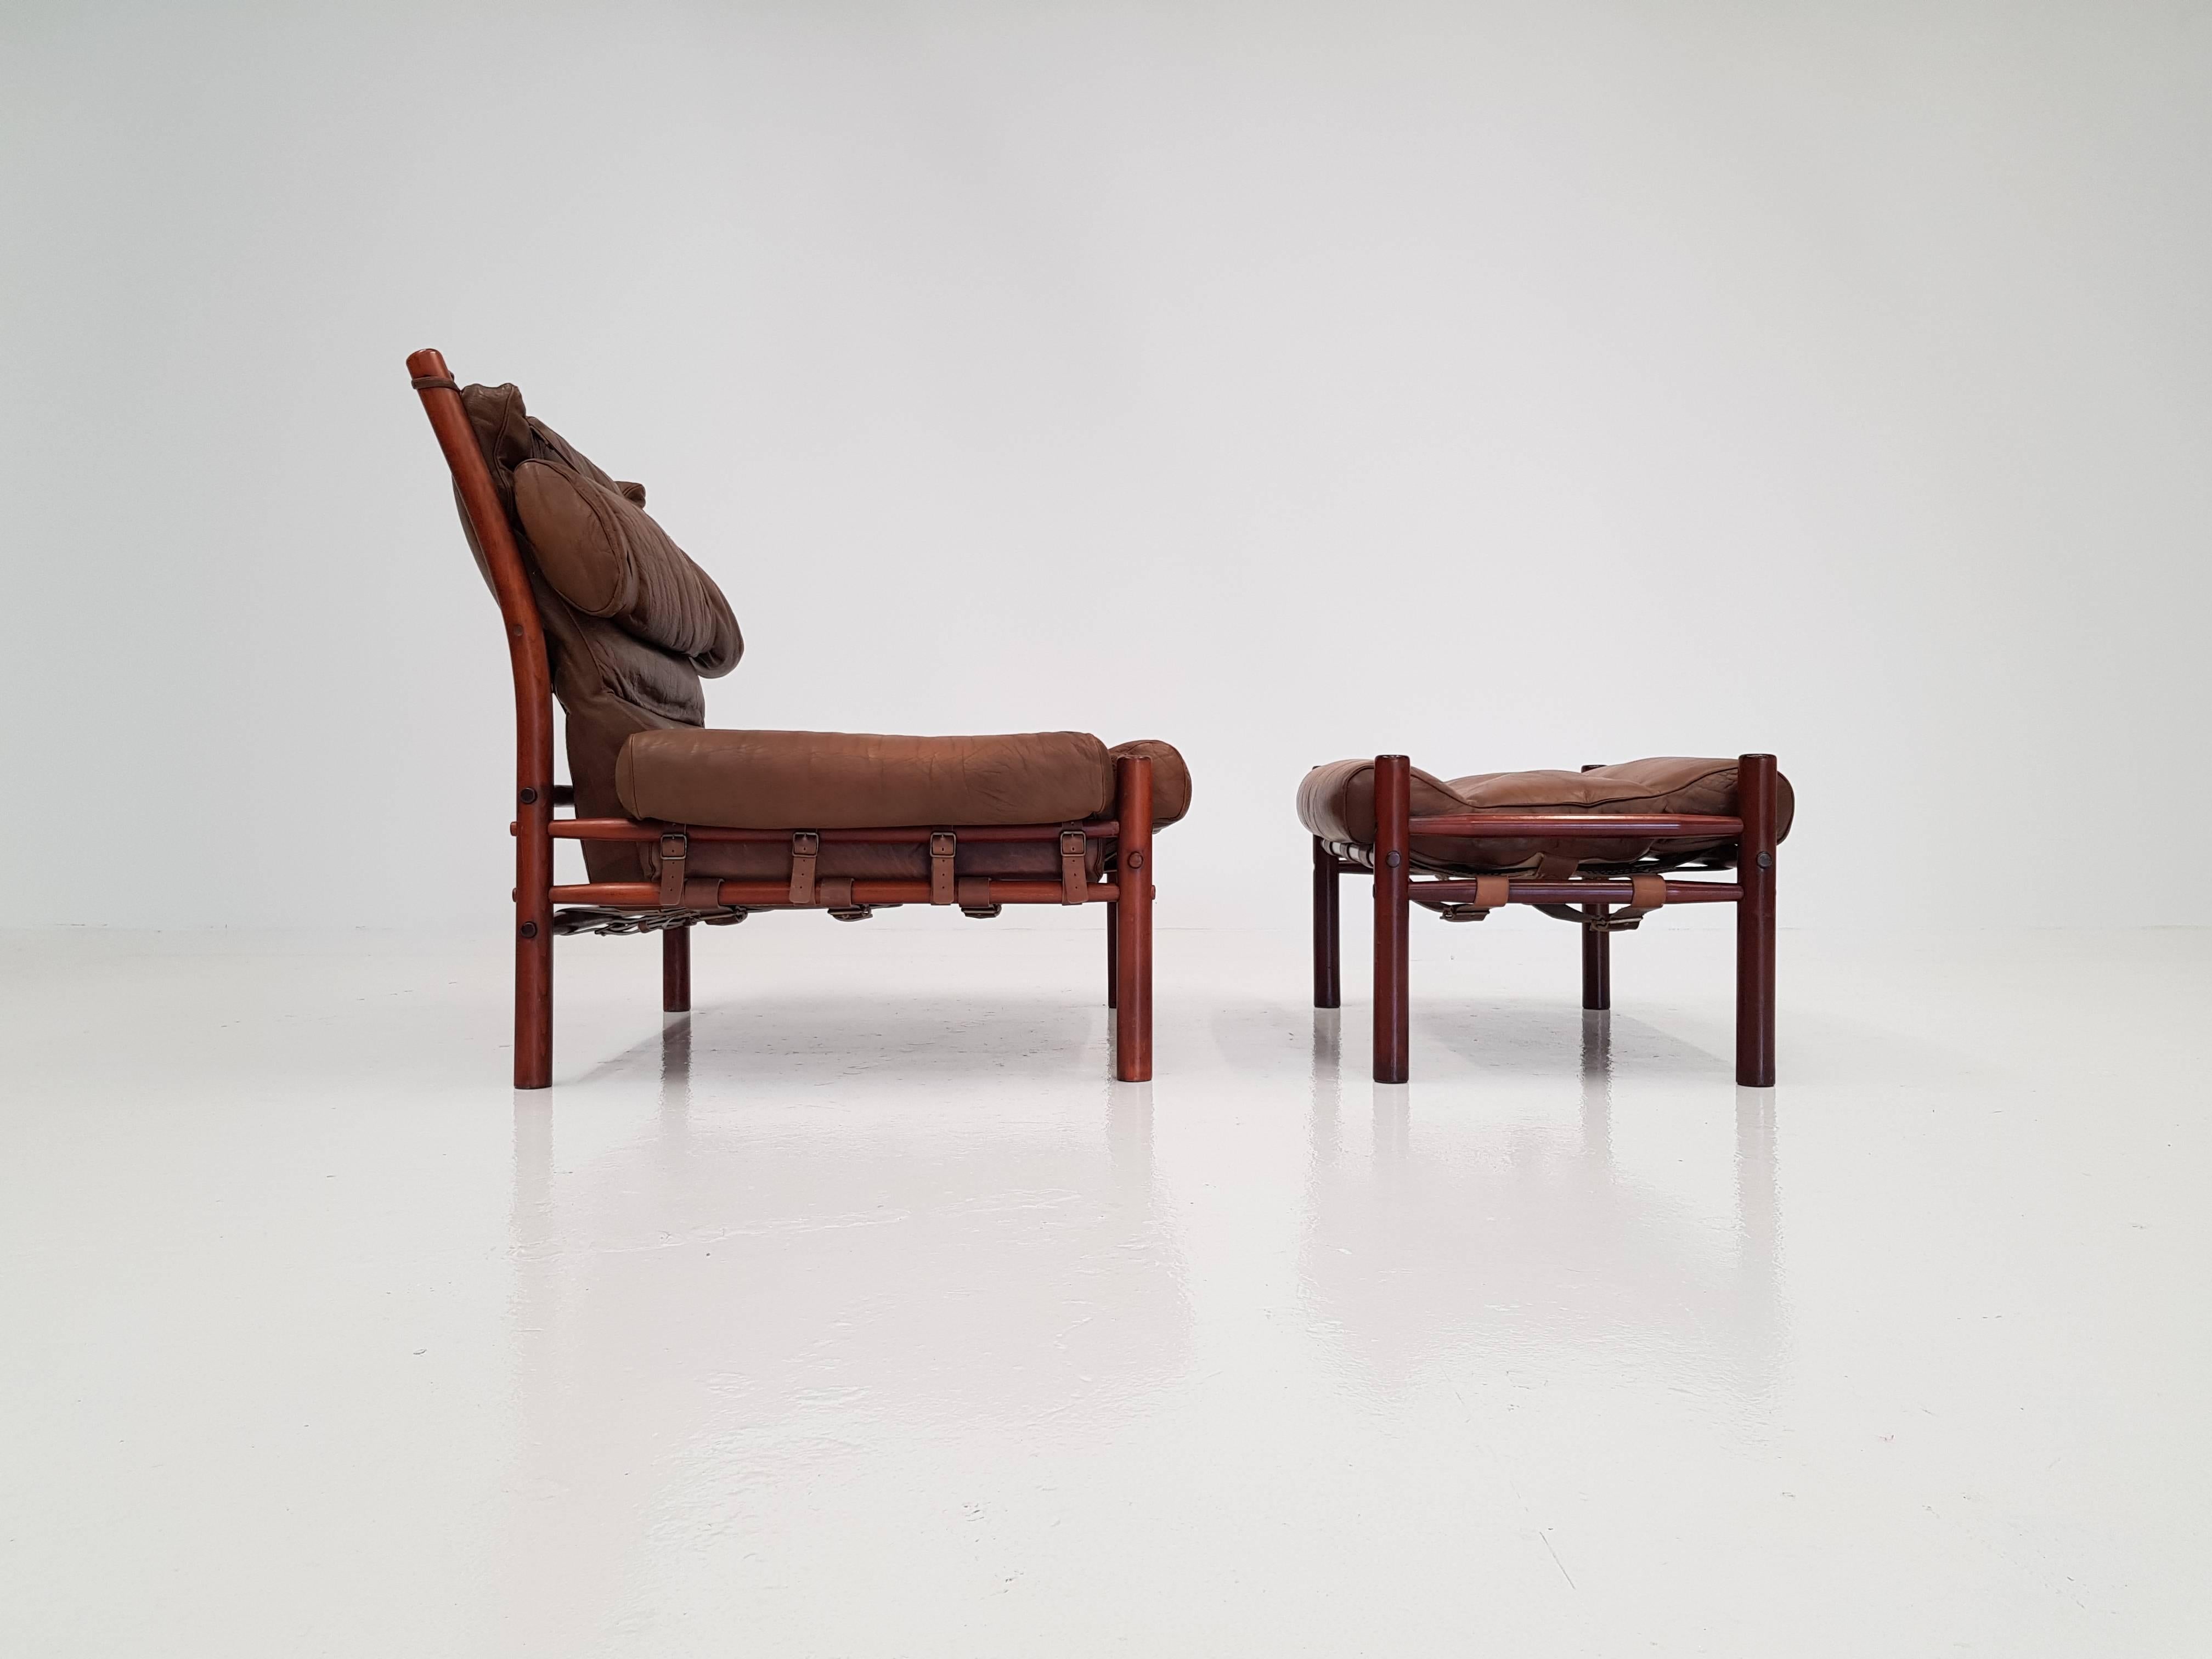 An iconic Inca chair and footstool by Swedish designer Arne Norell for Norell Möbler. An extremely comfortable chair which also looks amazing. The piece is in good vintage condition.

Consists of a stained beech frame with leather seat pads in a